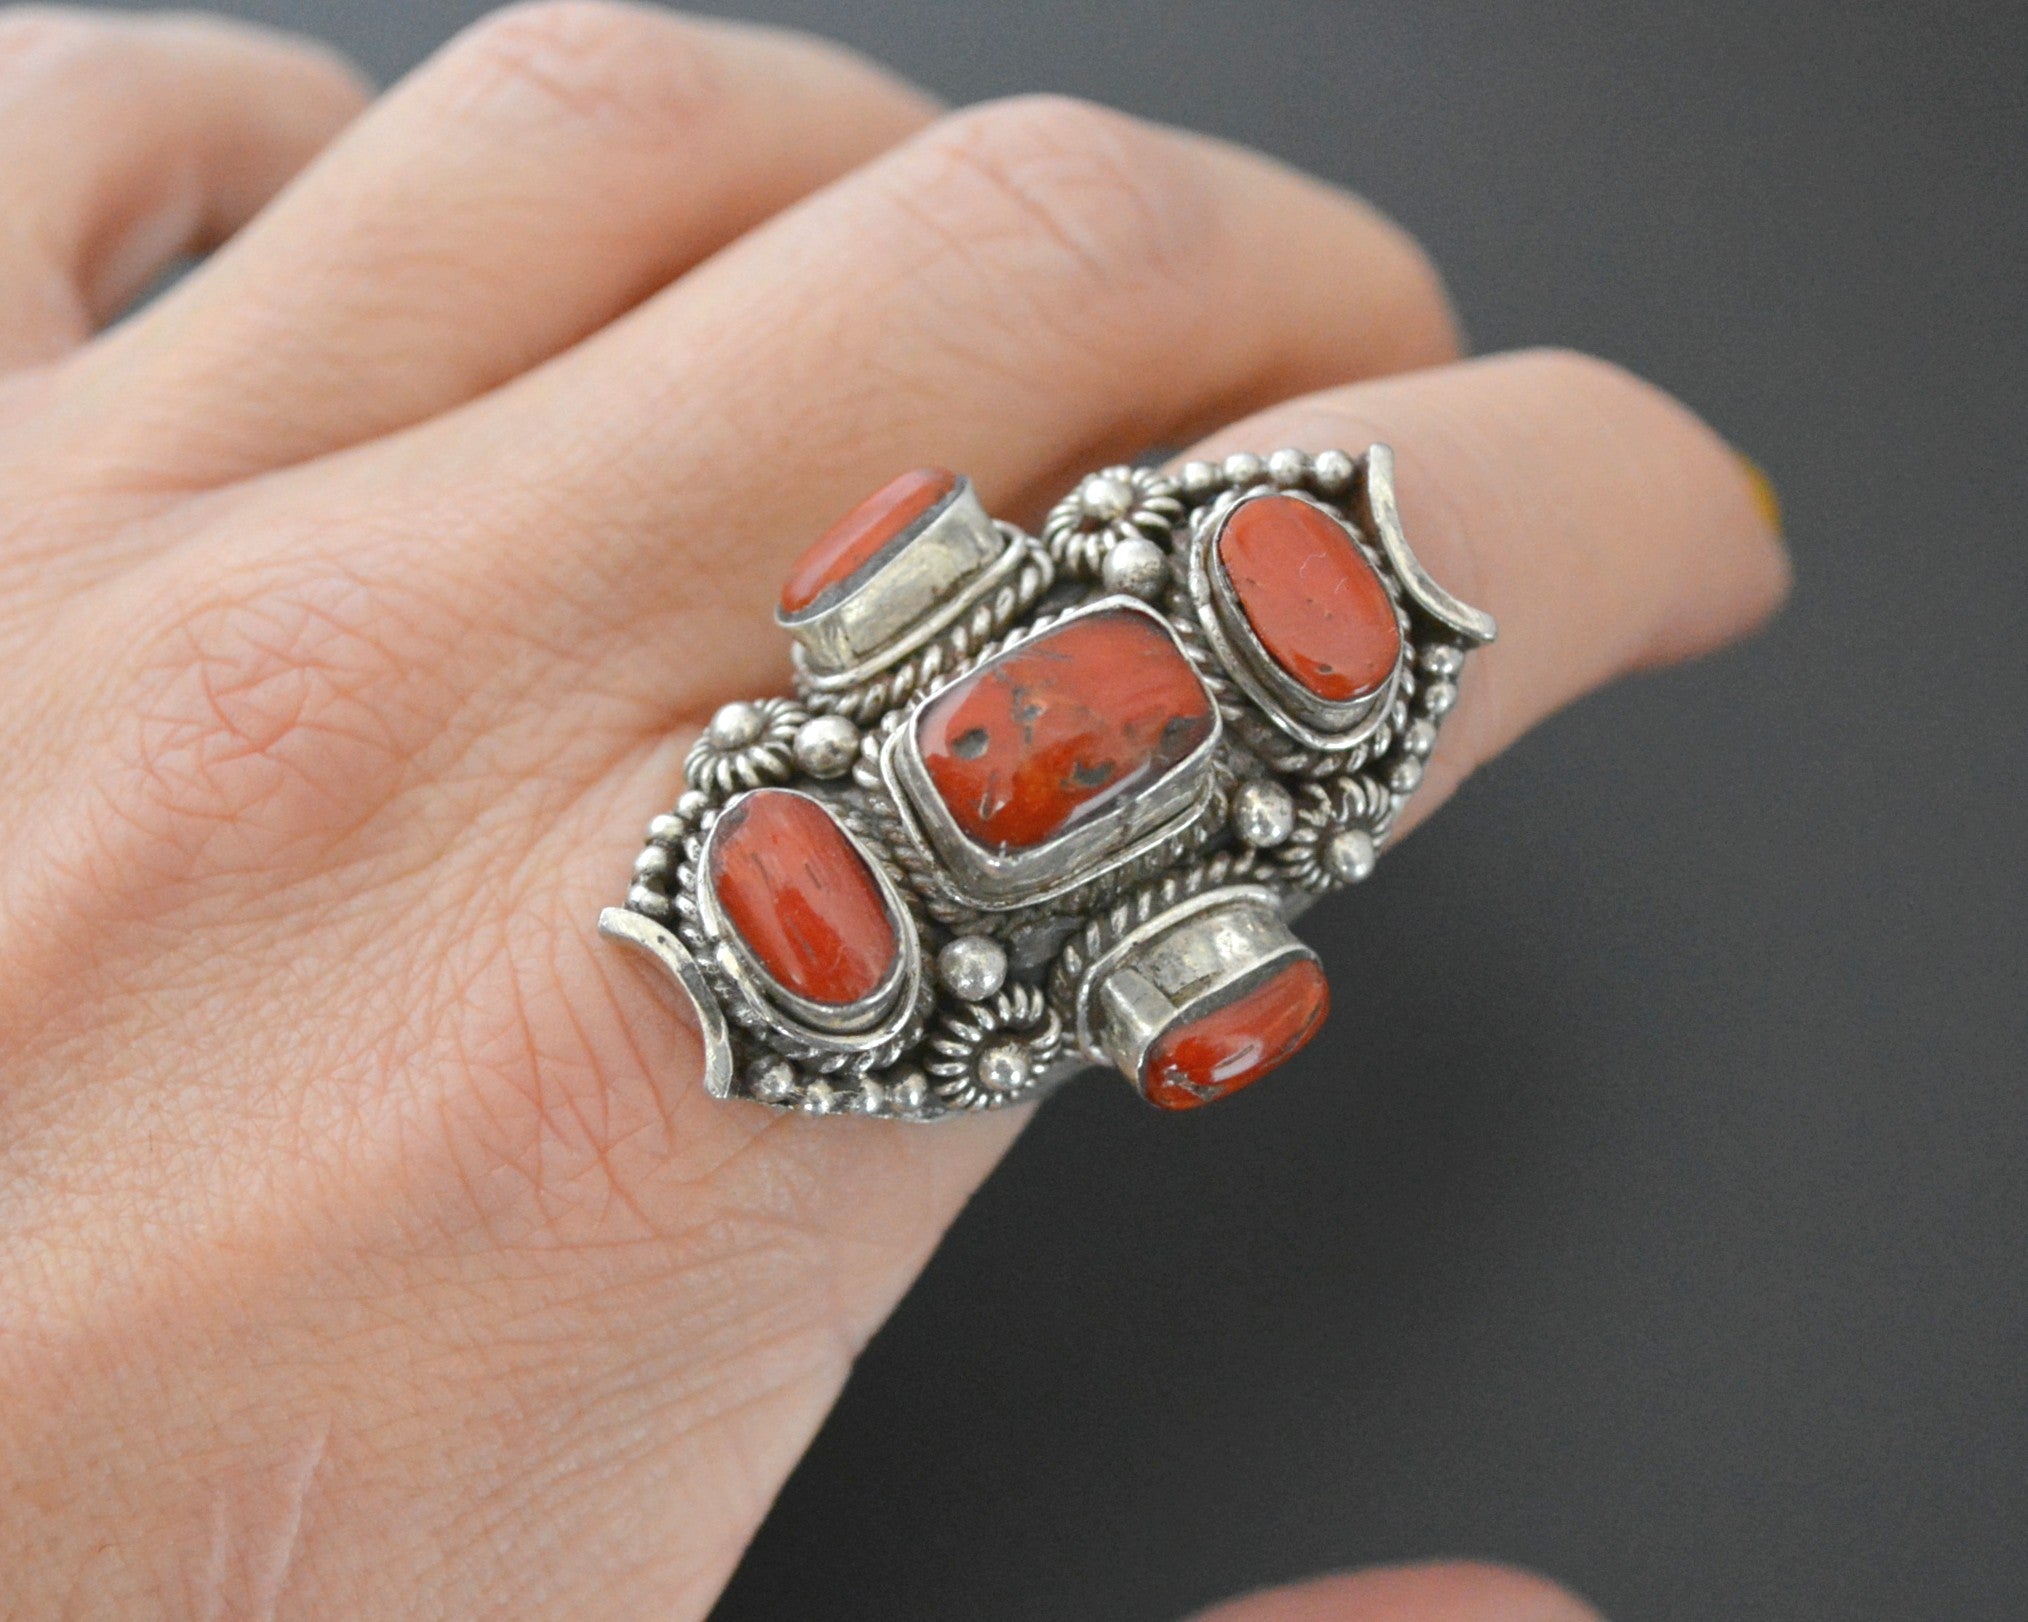 Reserved for L. - Nepali Coral Ring - Size 8